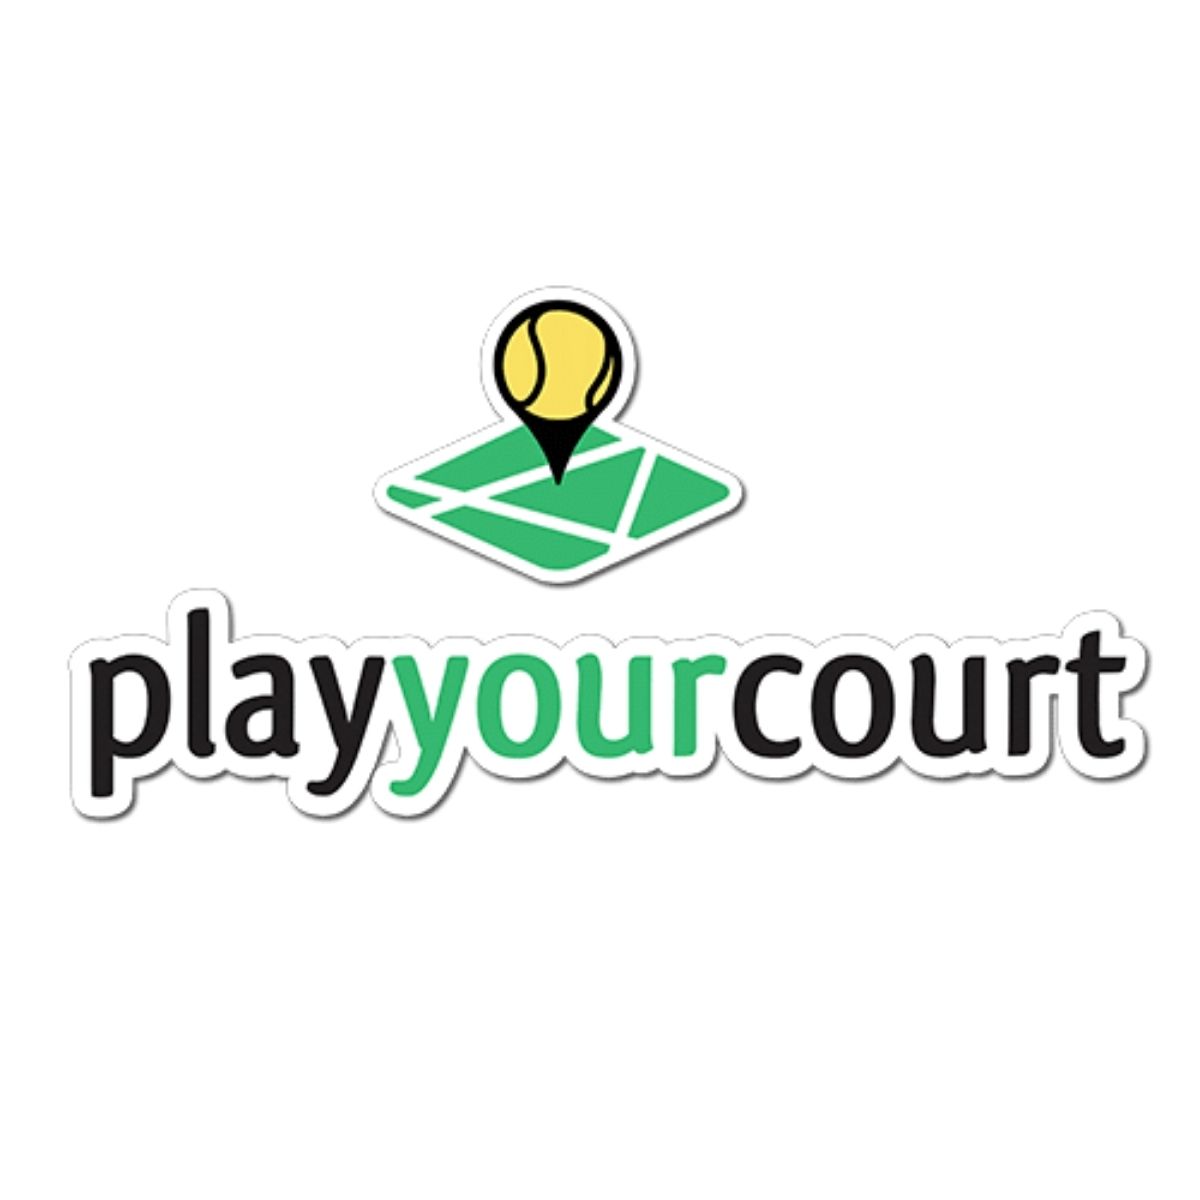 play your court program